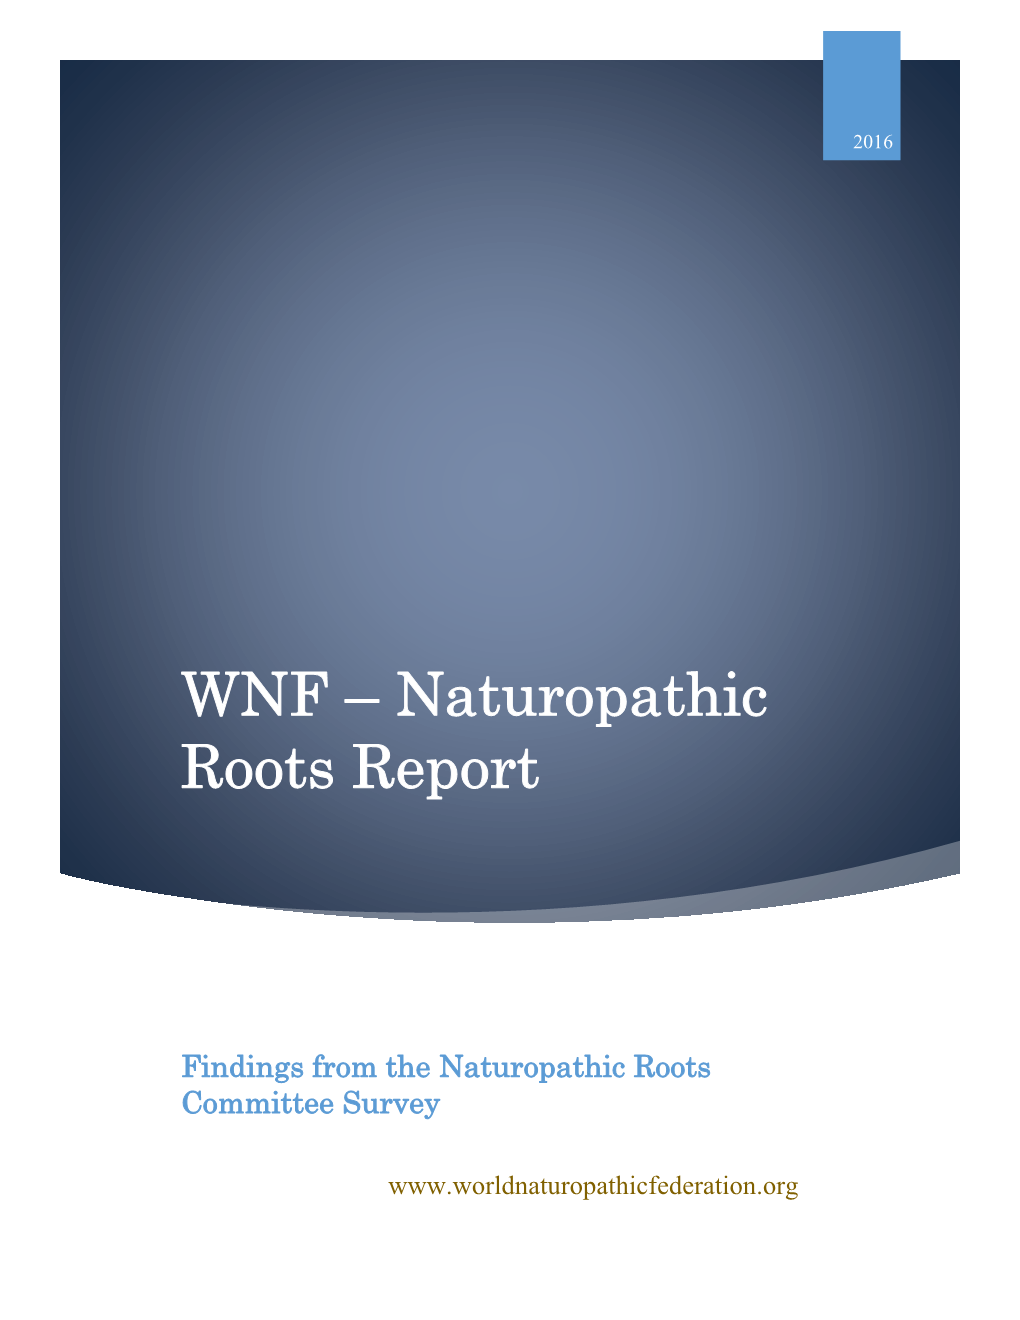 WNF – Naturopathic Roots Report